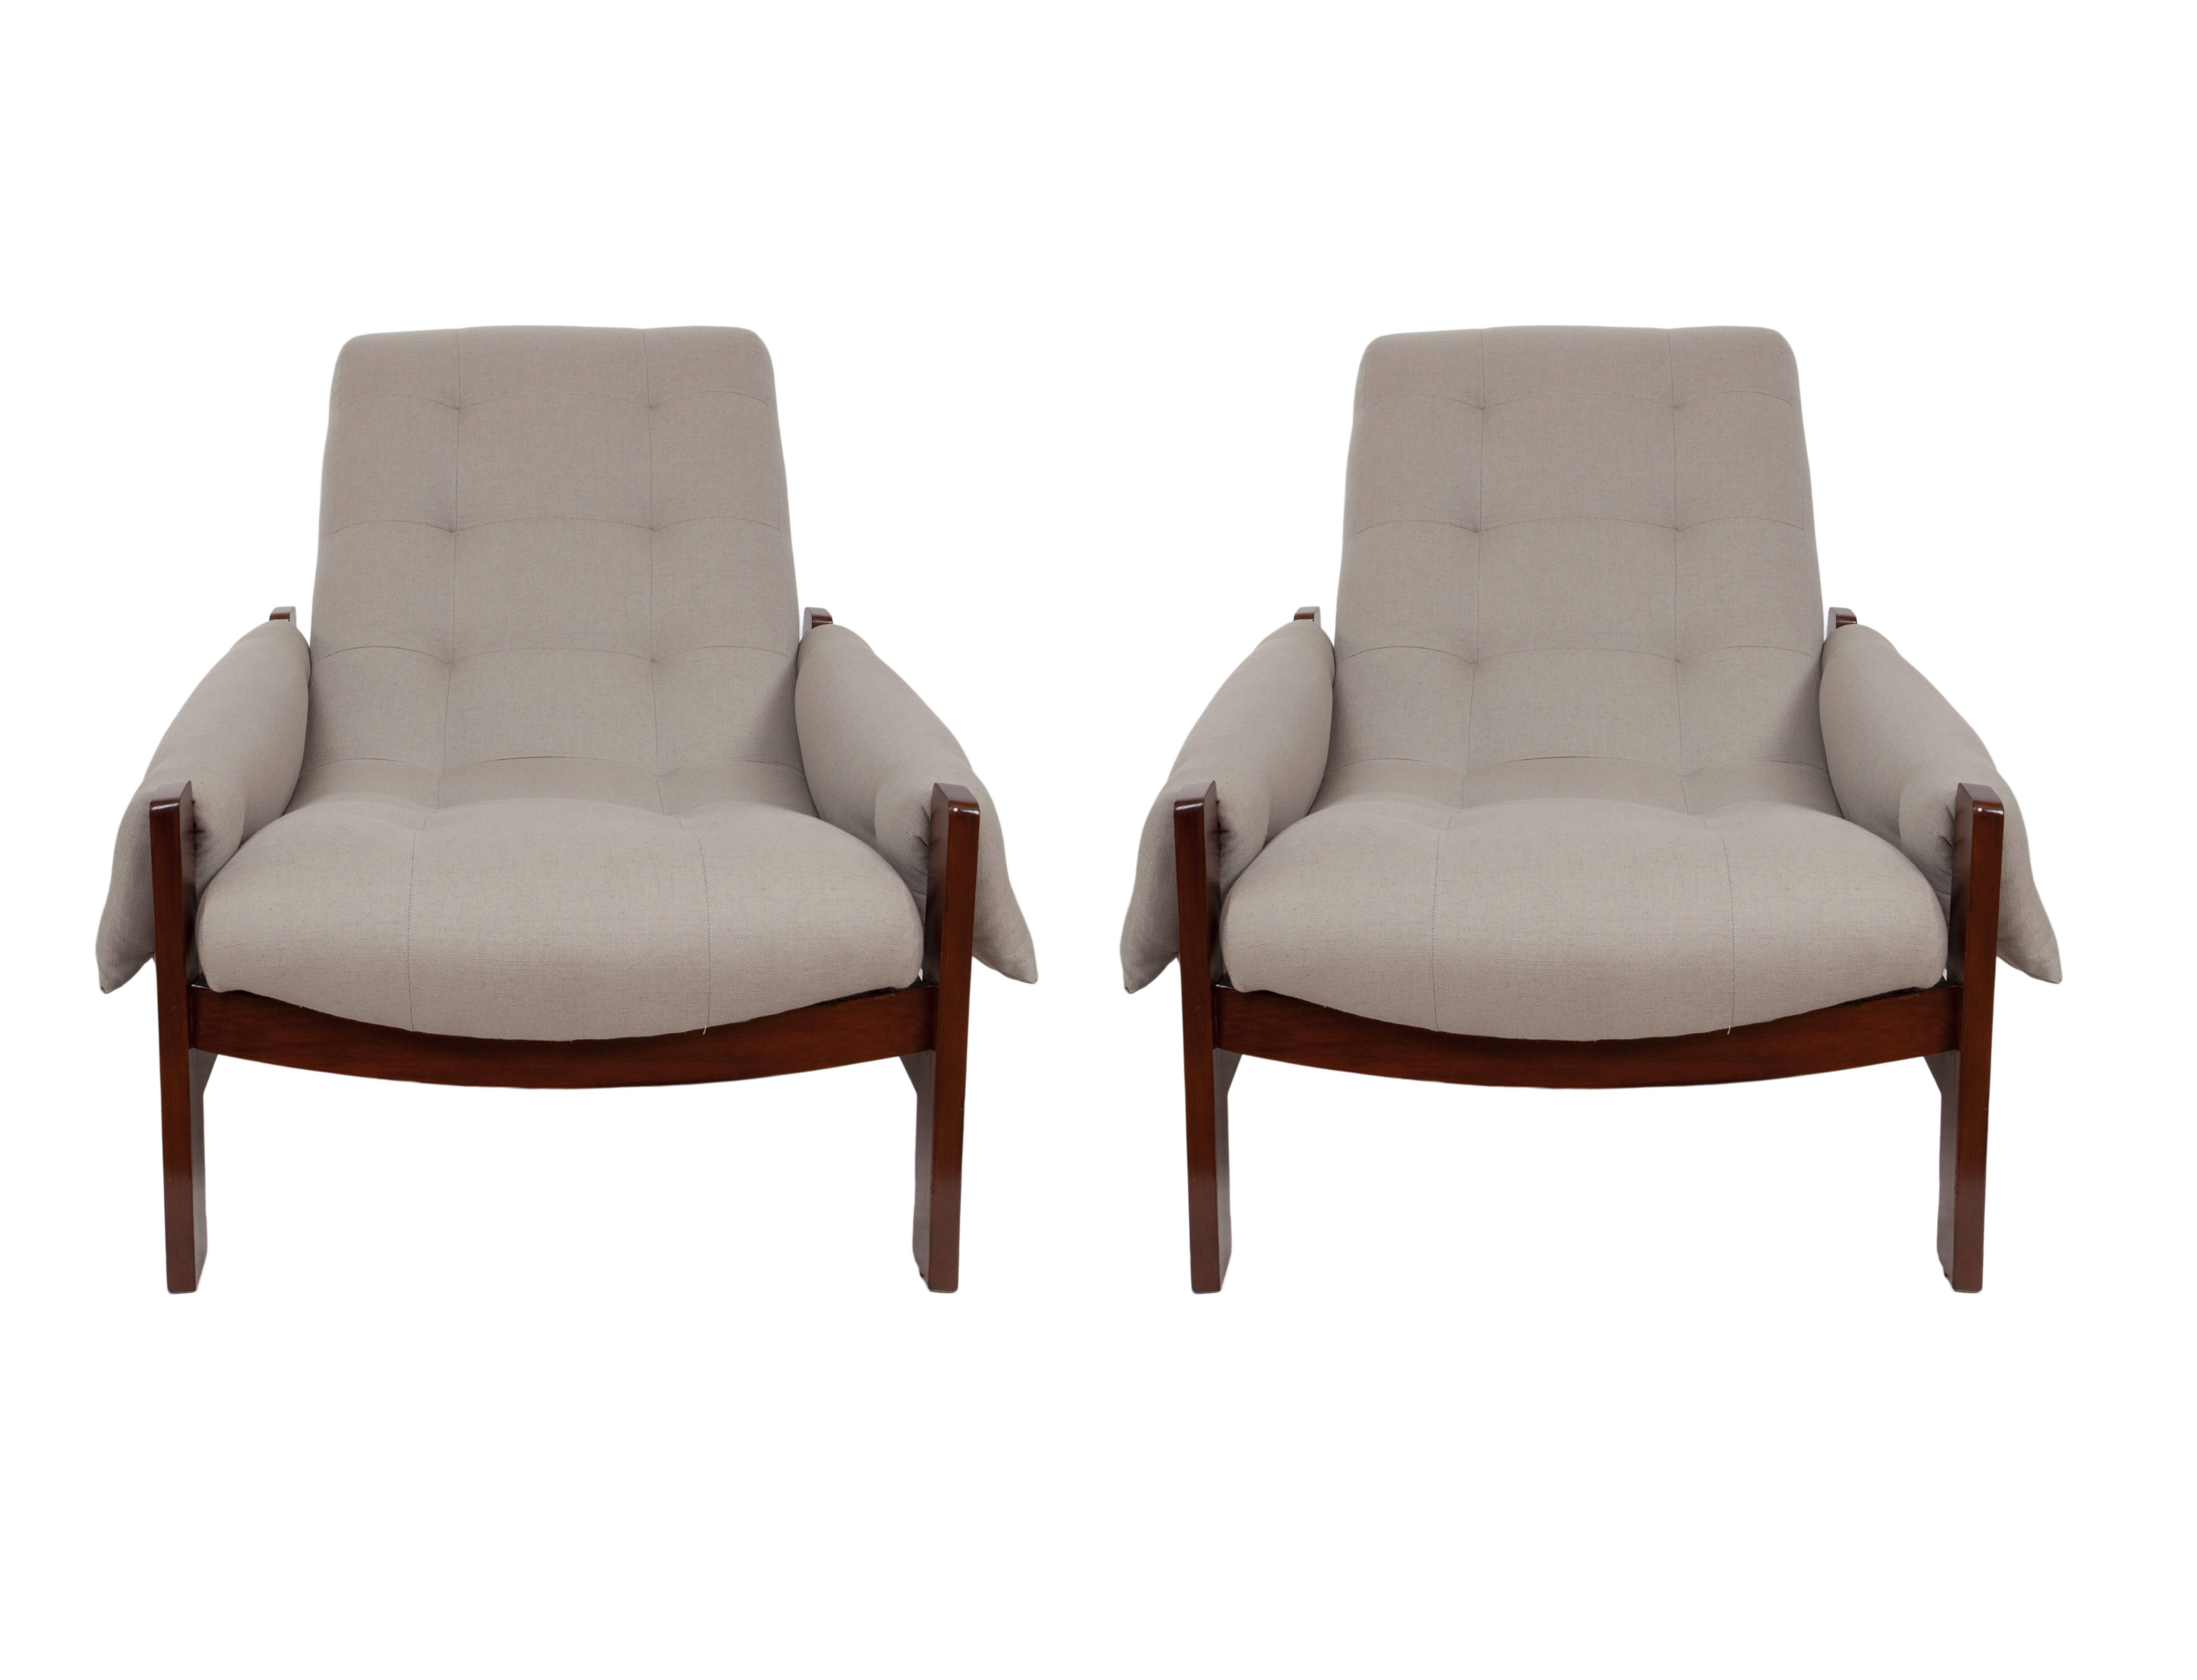 Mid-20th Century Pair of Gelli Lounge Chairs